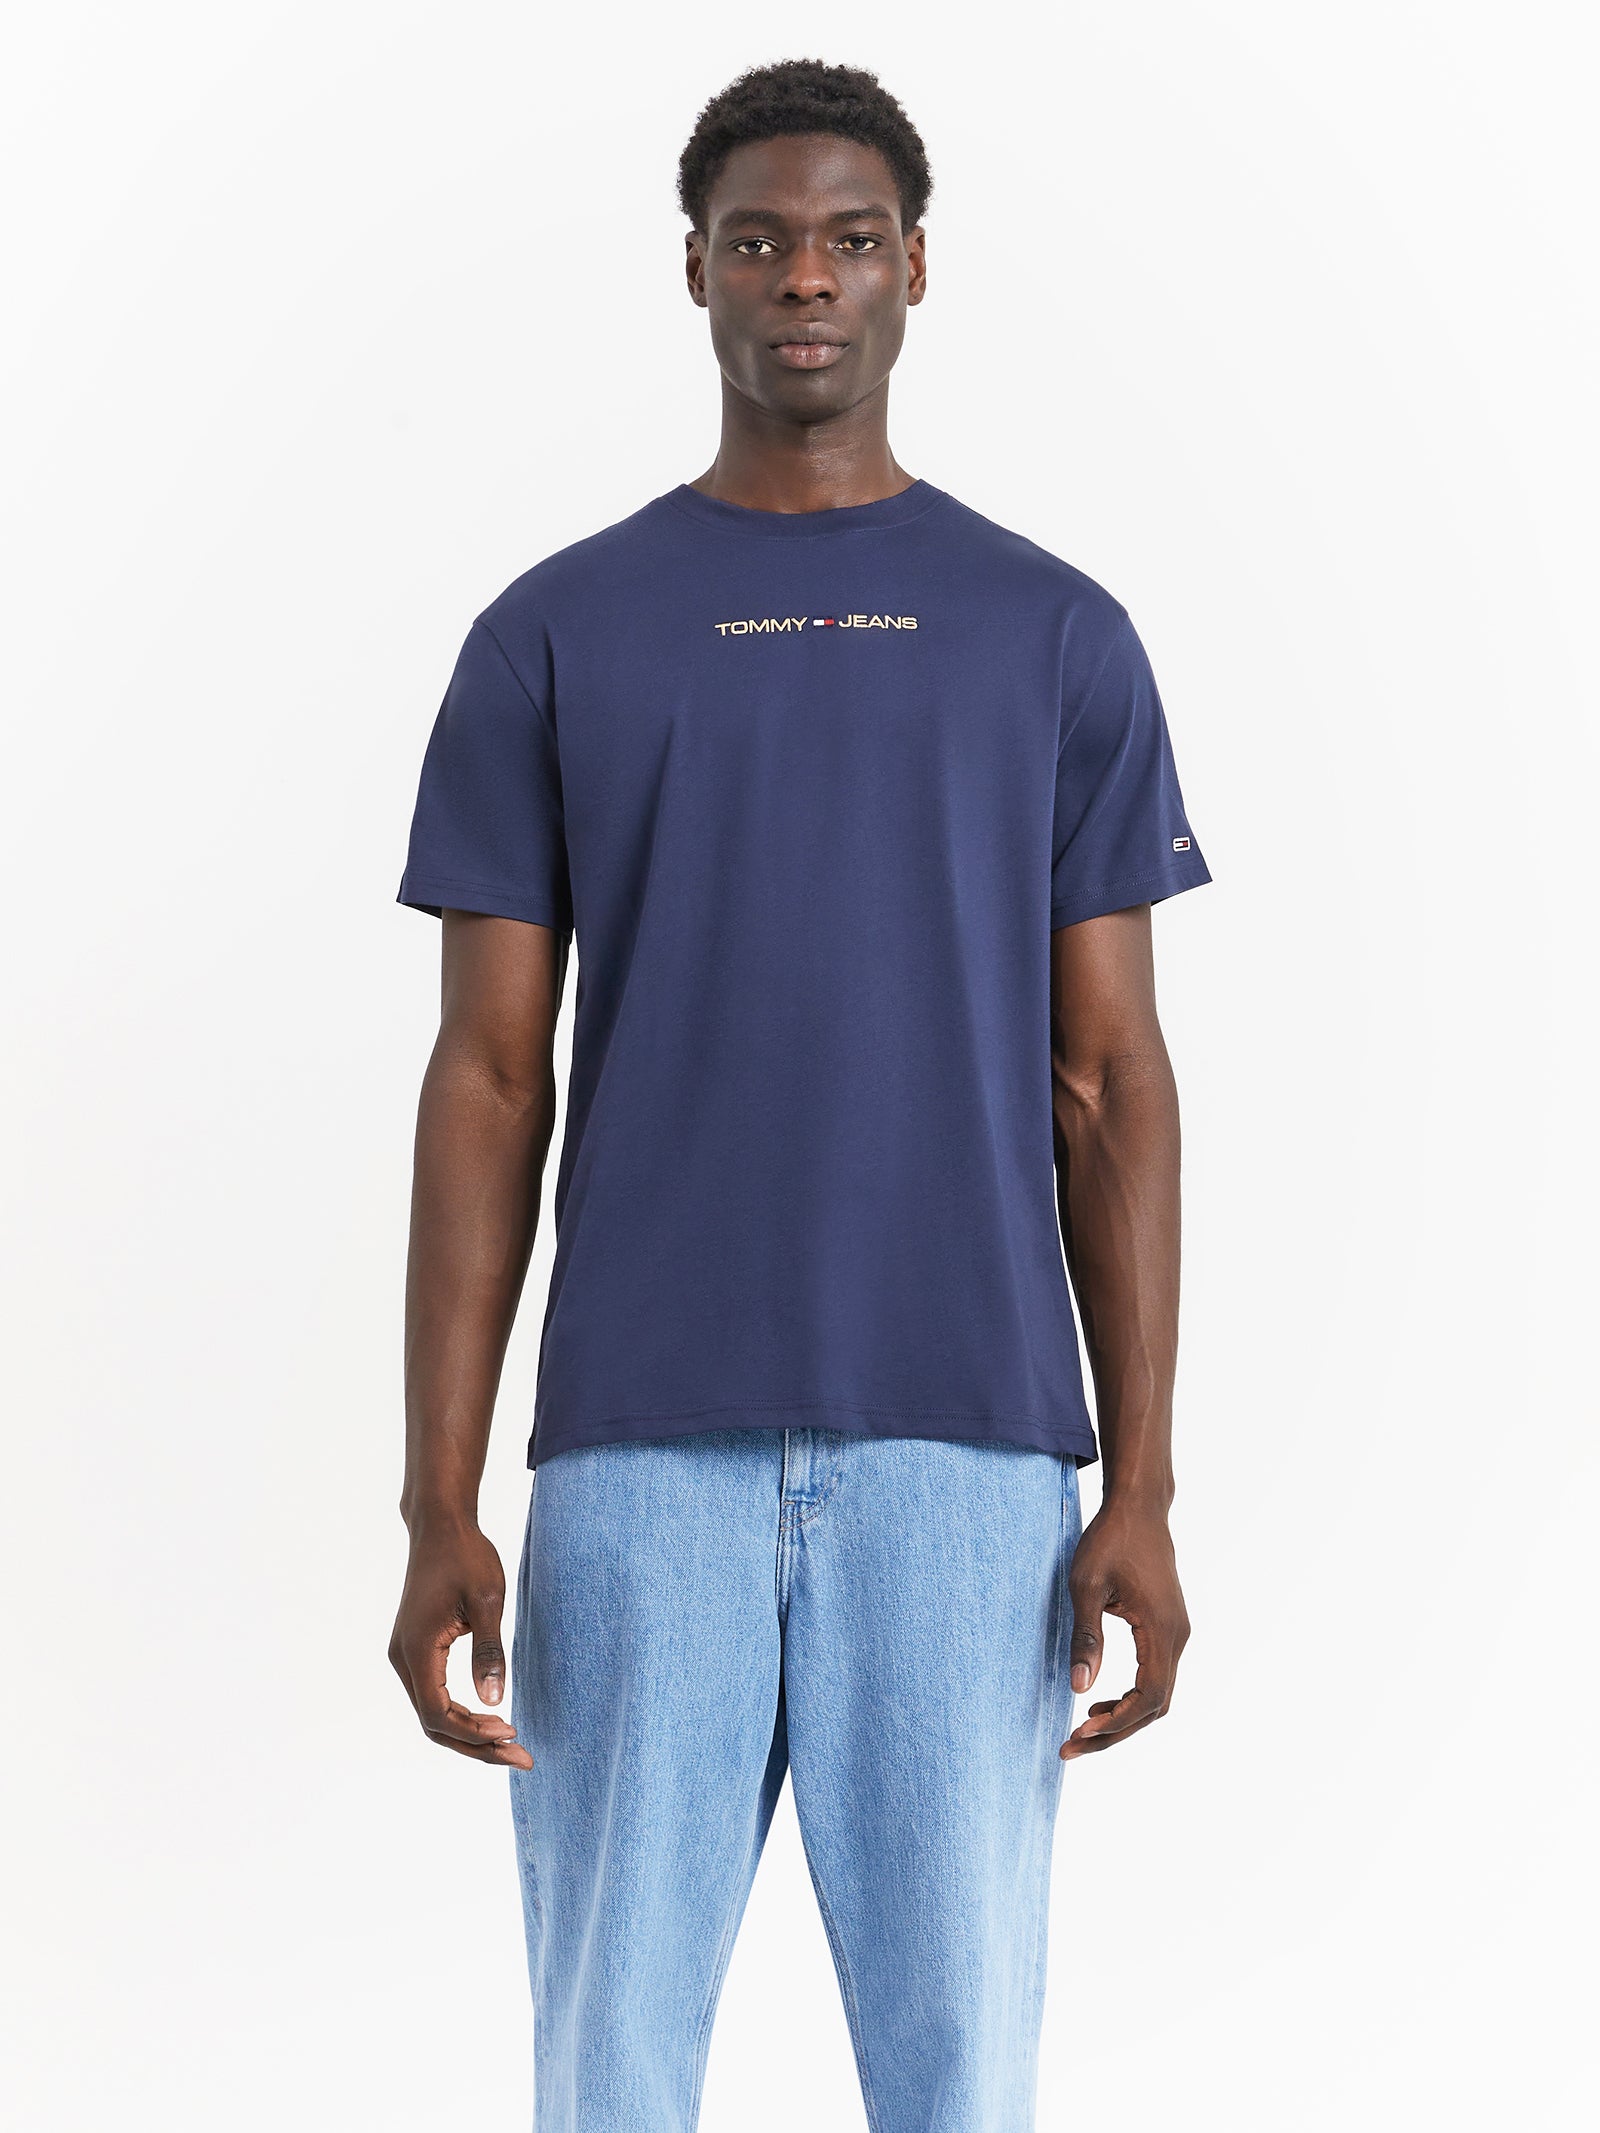 Classic Gold Linear T-Shirt in Twilight Navy